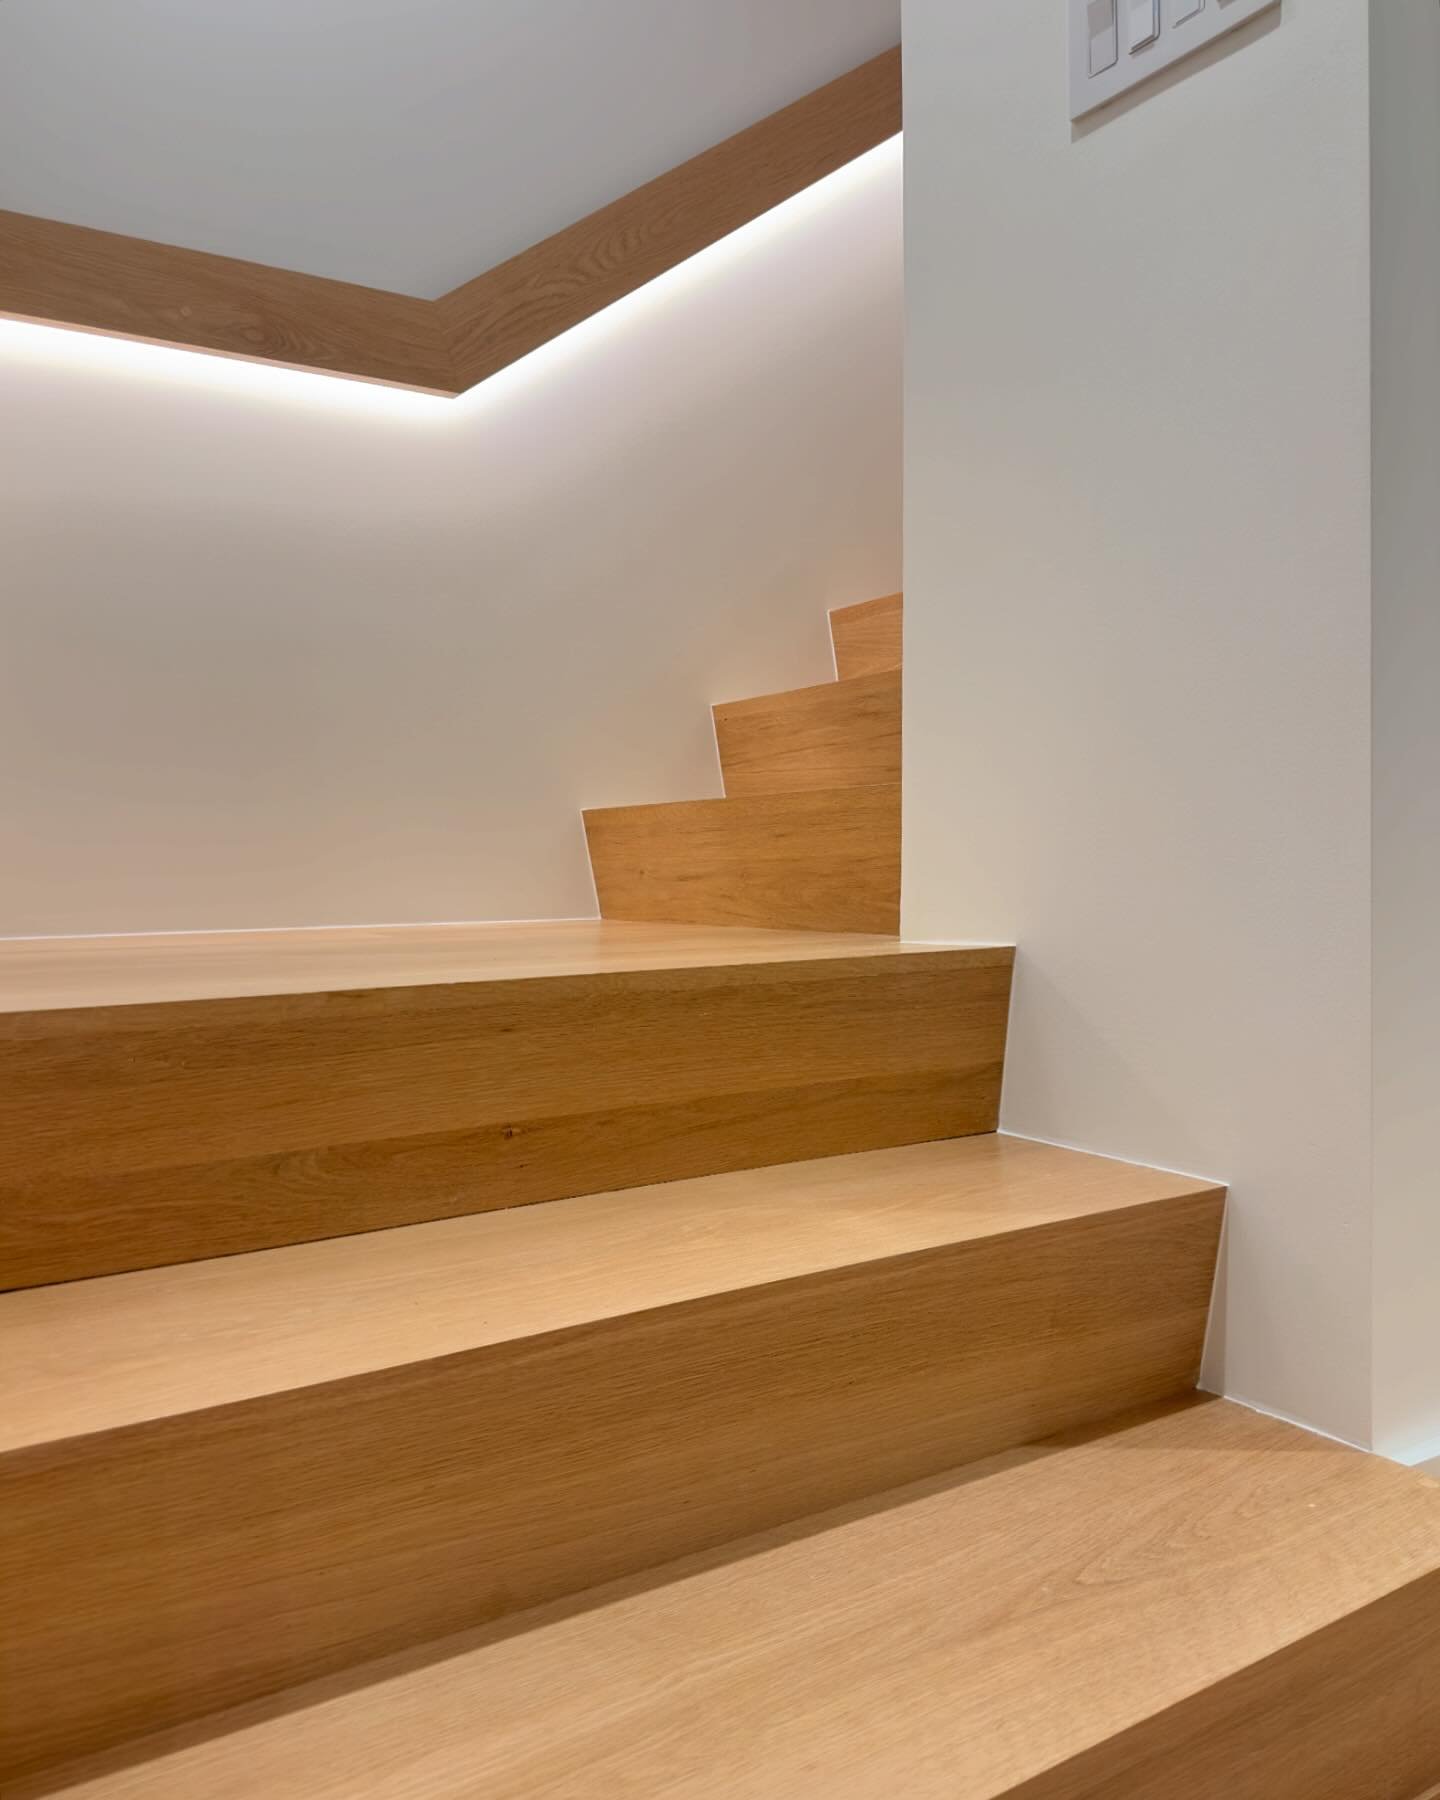 Elevate your space, one step at a time 😉

#modernstairs #accentlighting #staircaselighting #interiordesign  #stairsinspo #whiteoakstairs